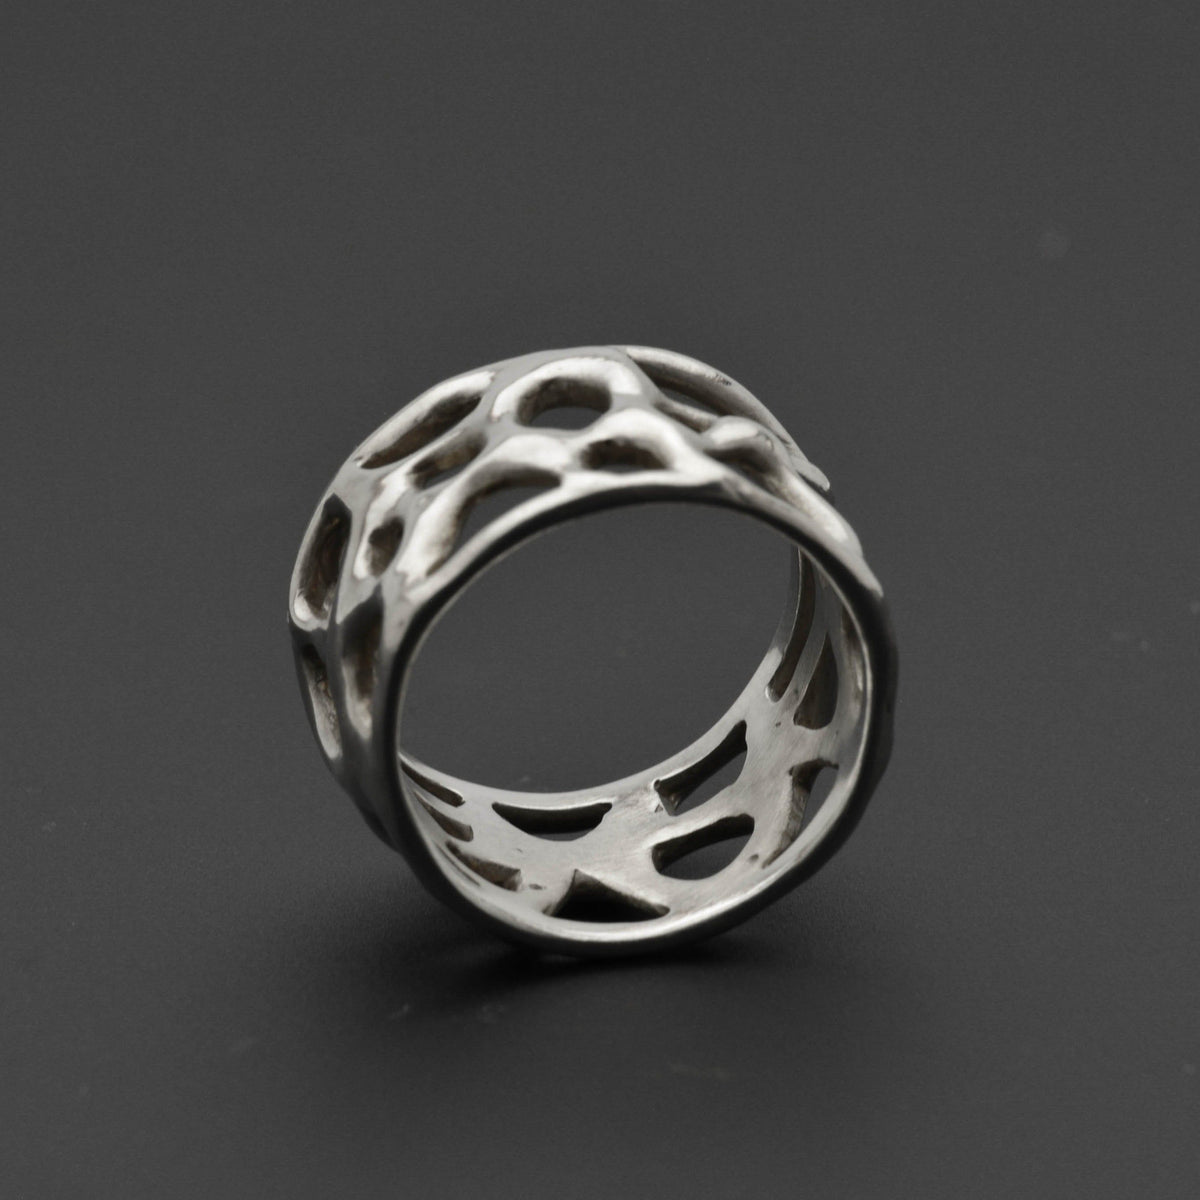 Organic Elegance: A One-of-a-Kind Sterling Silver Ring Inspired by Natural Beauty